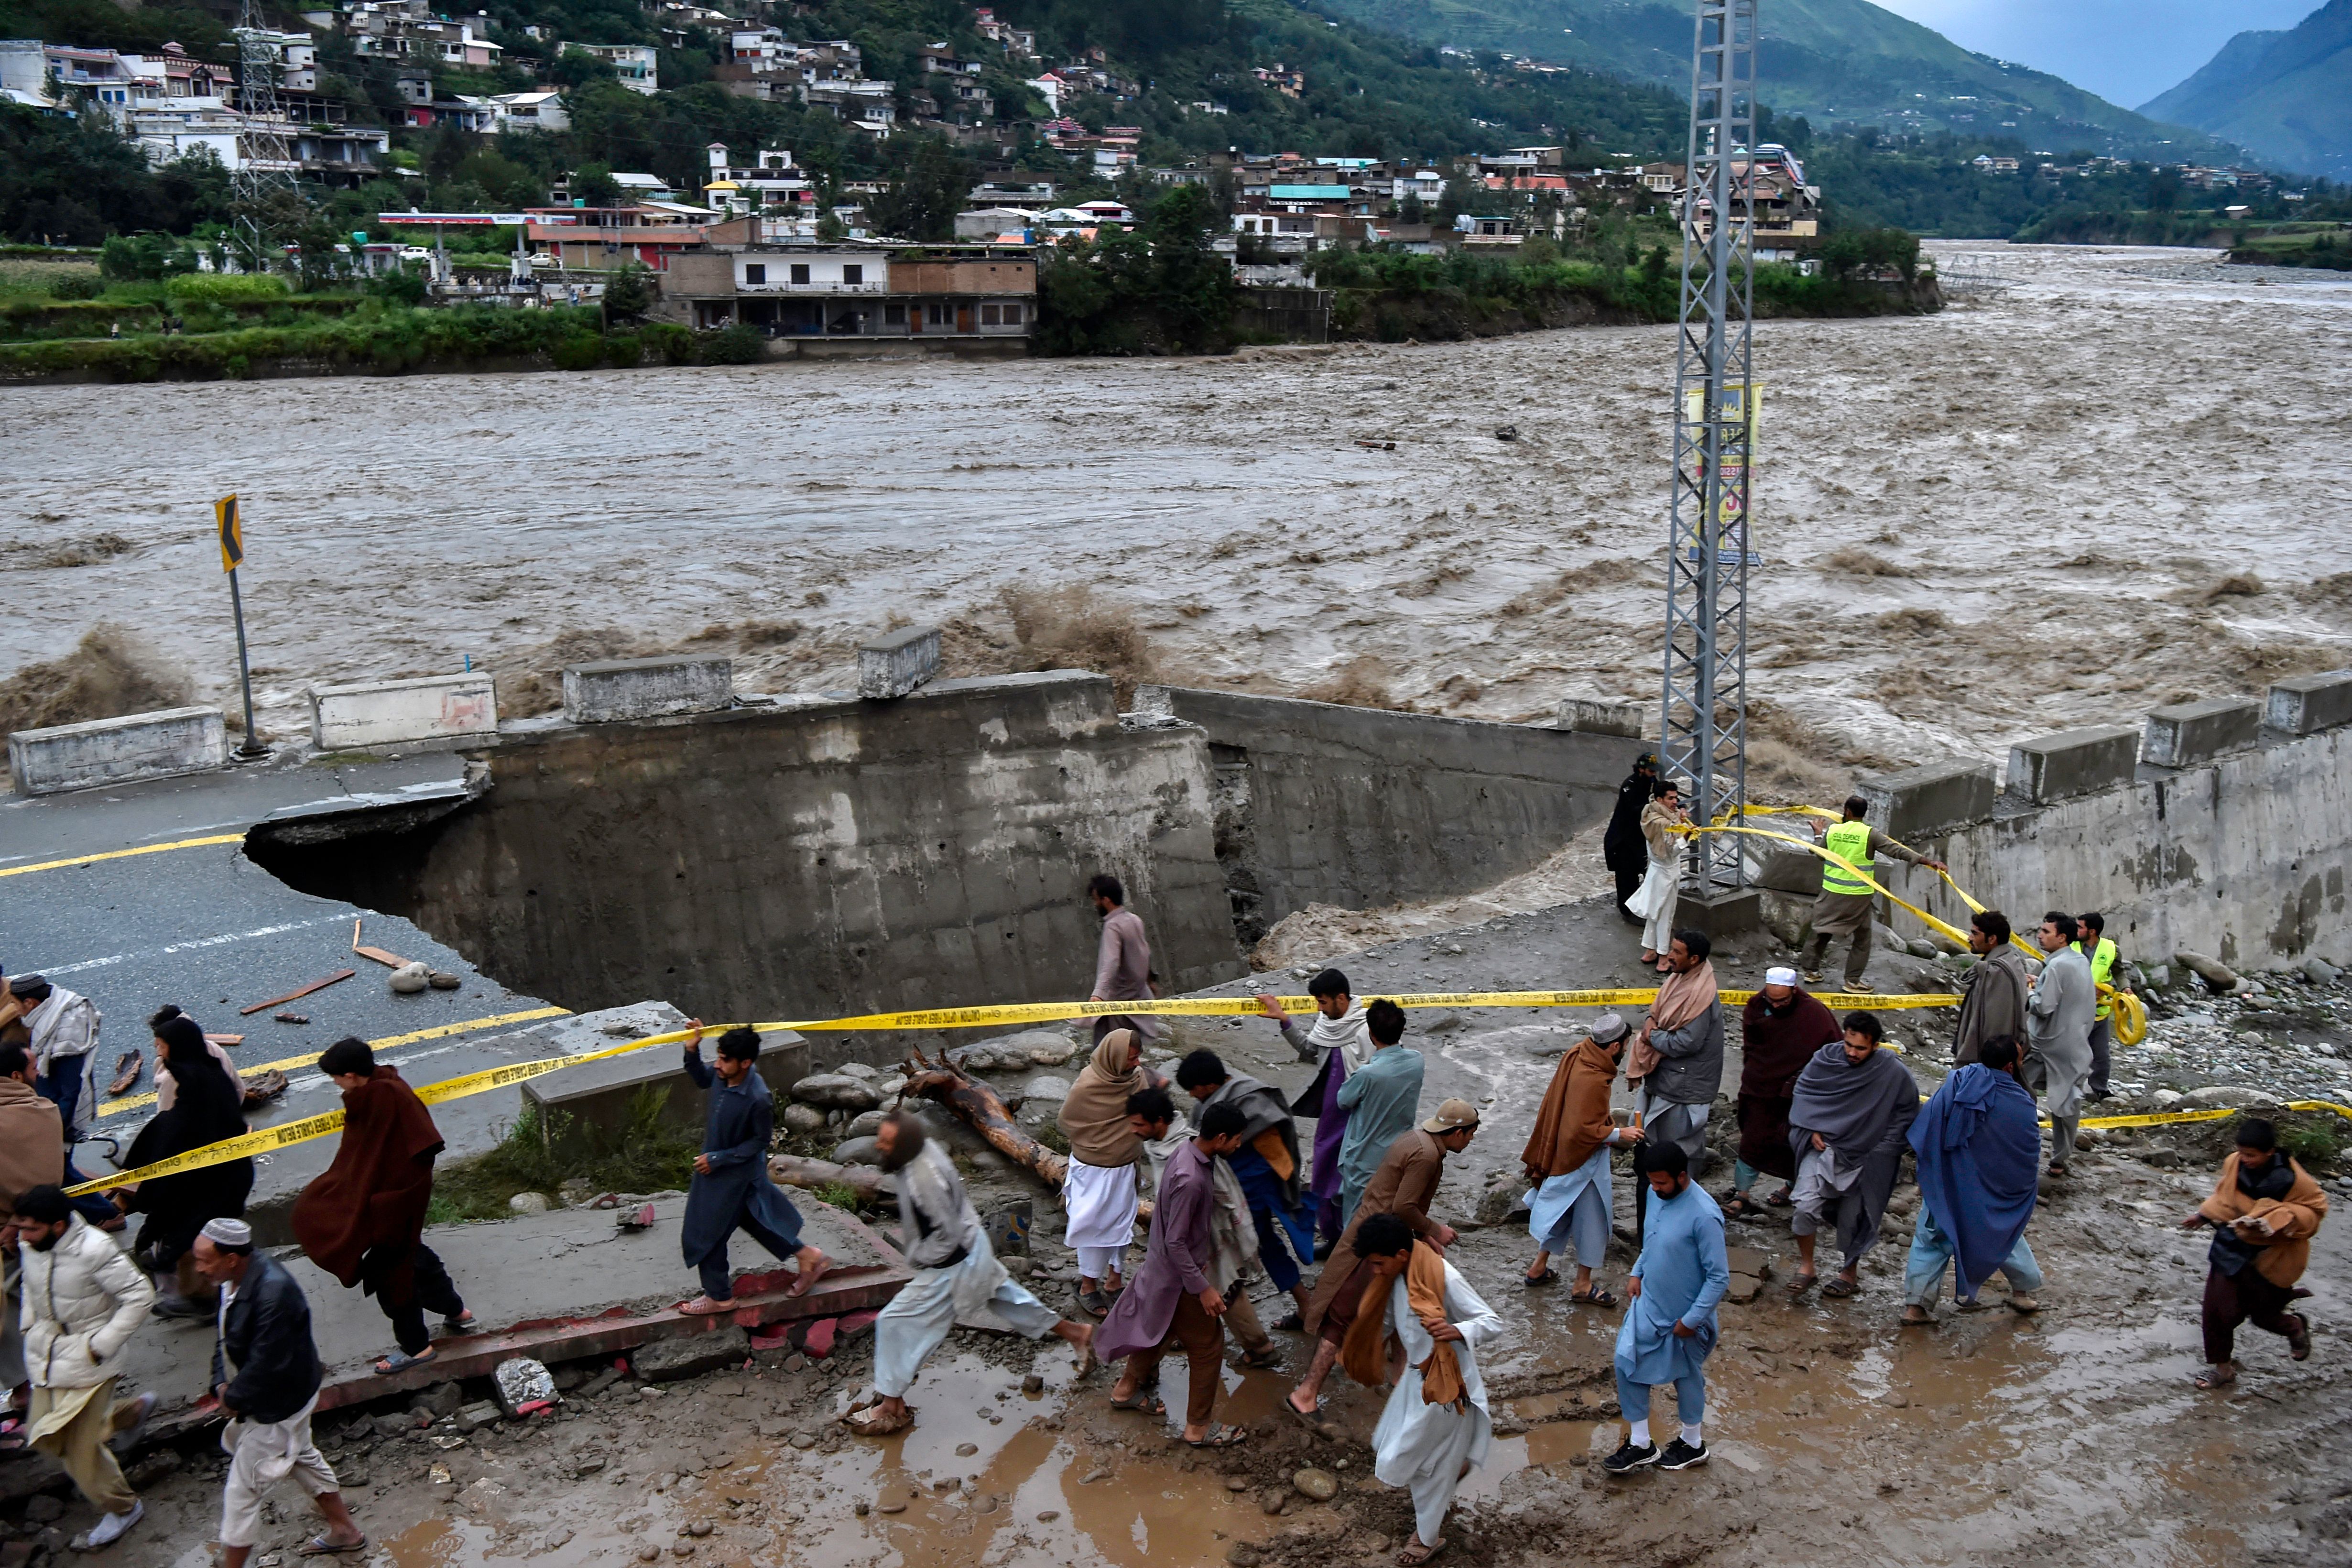 People gather in front of a road damaged by flood waters following heavy monsoon rains in Madian area in Pakistan's northern Swat Valley on August 27.